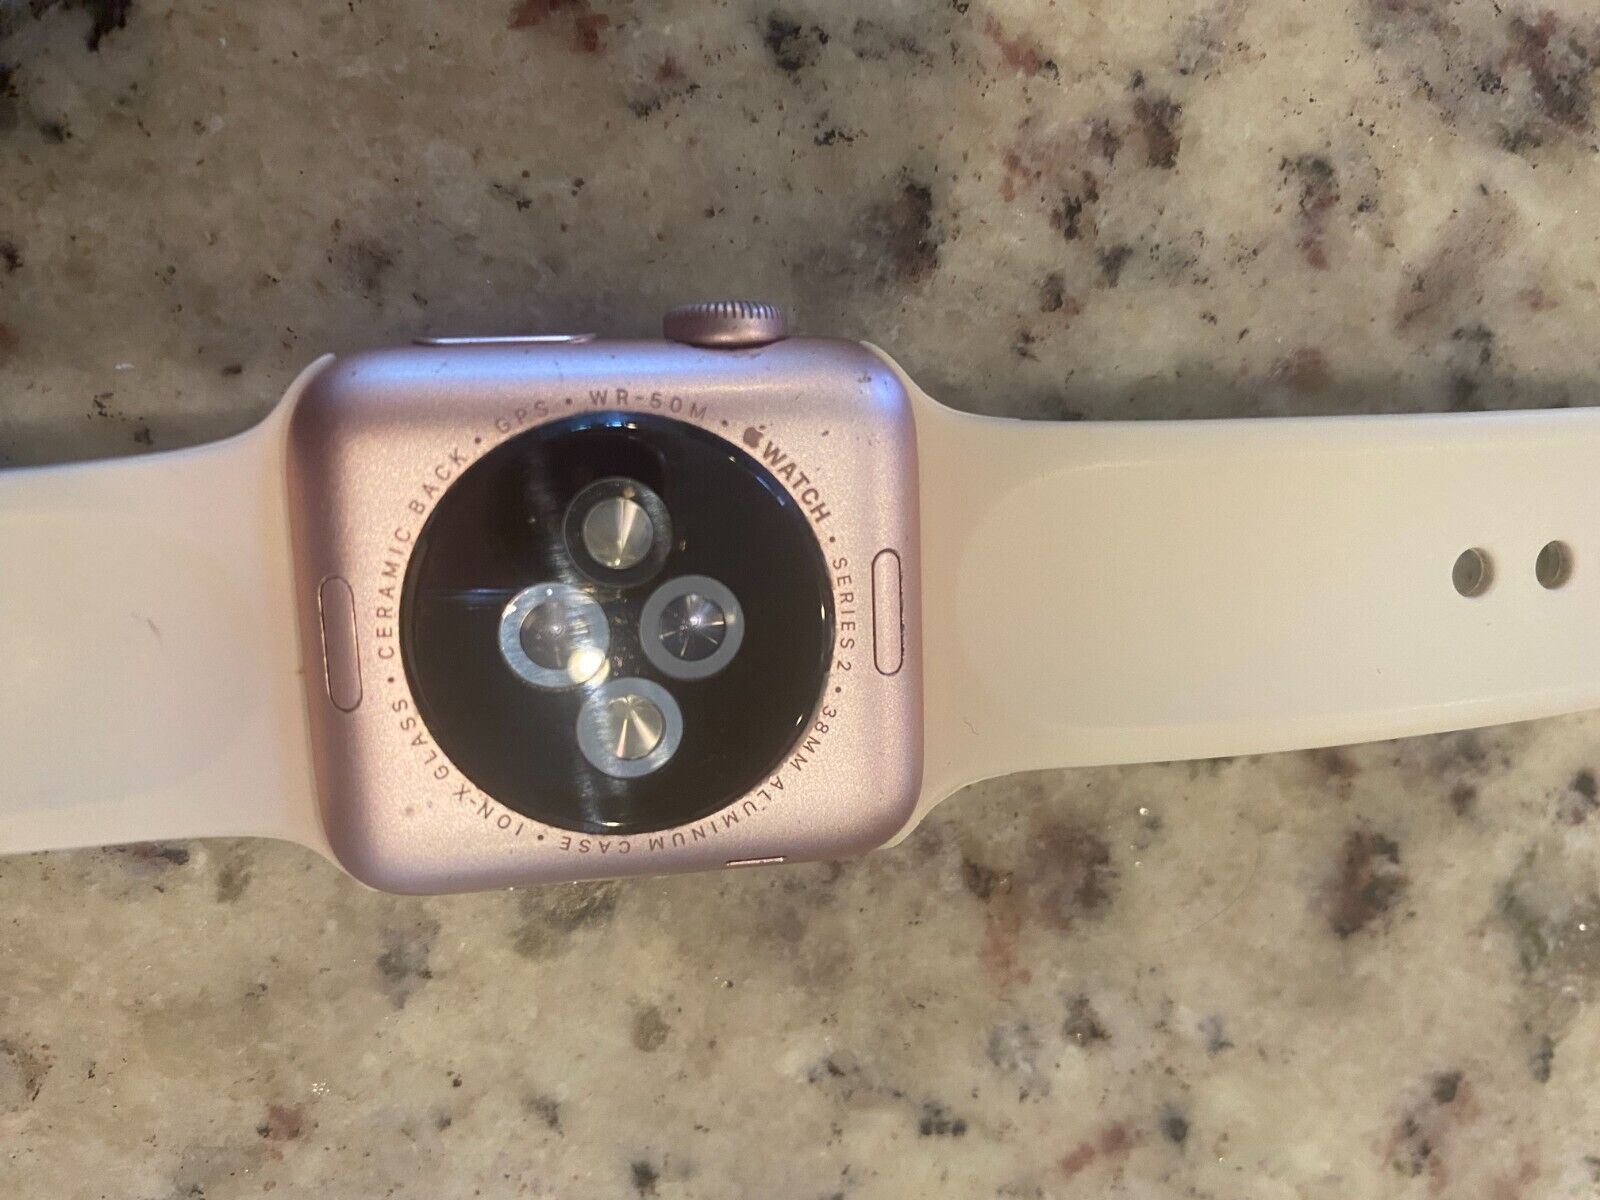 Apple Watch Series 2 38mm - Used - Screen Cracked - Otherwise Functional